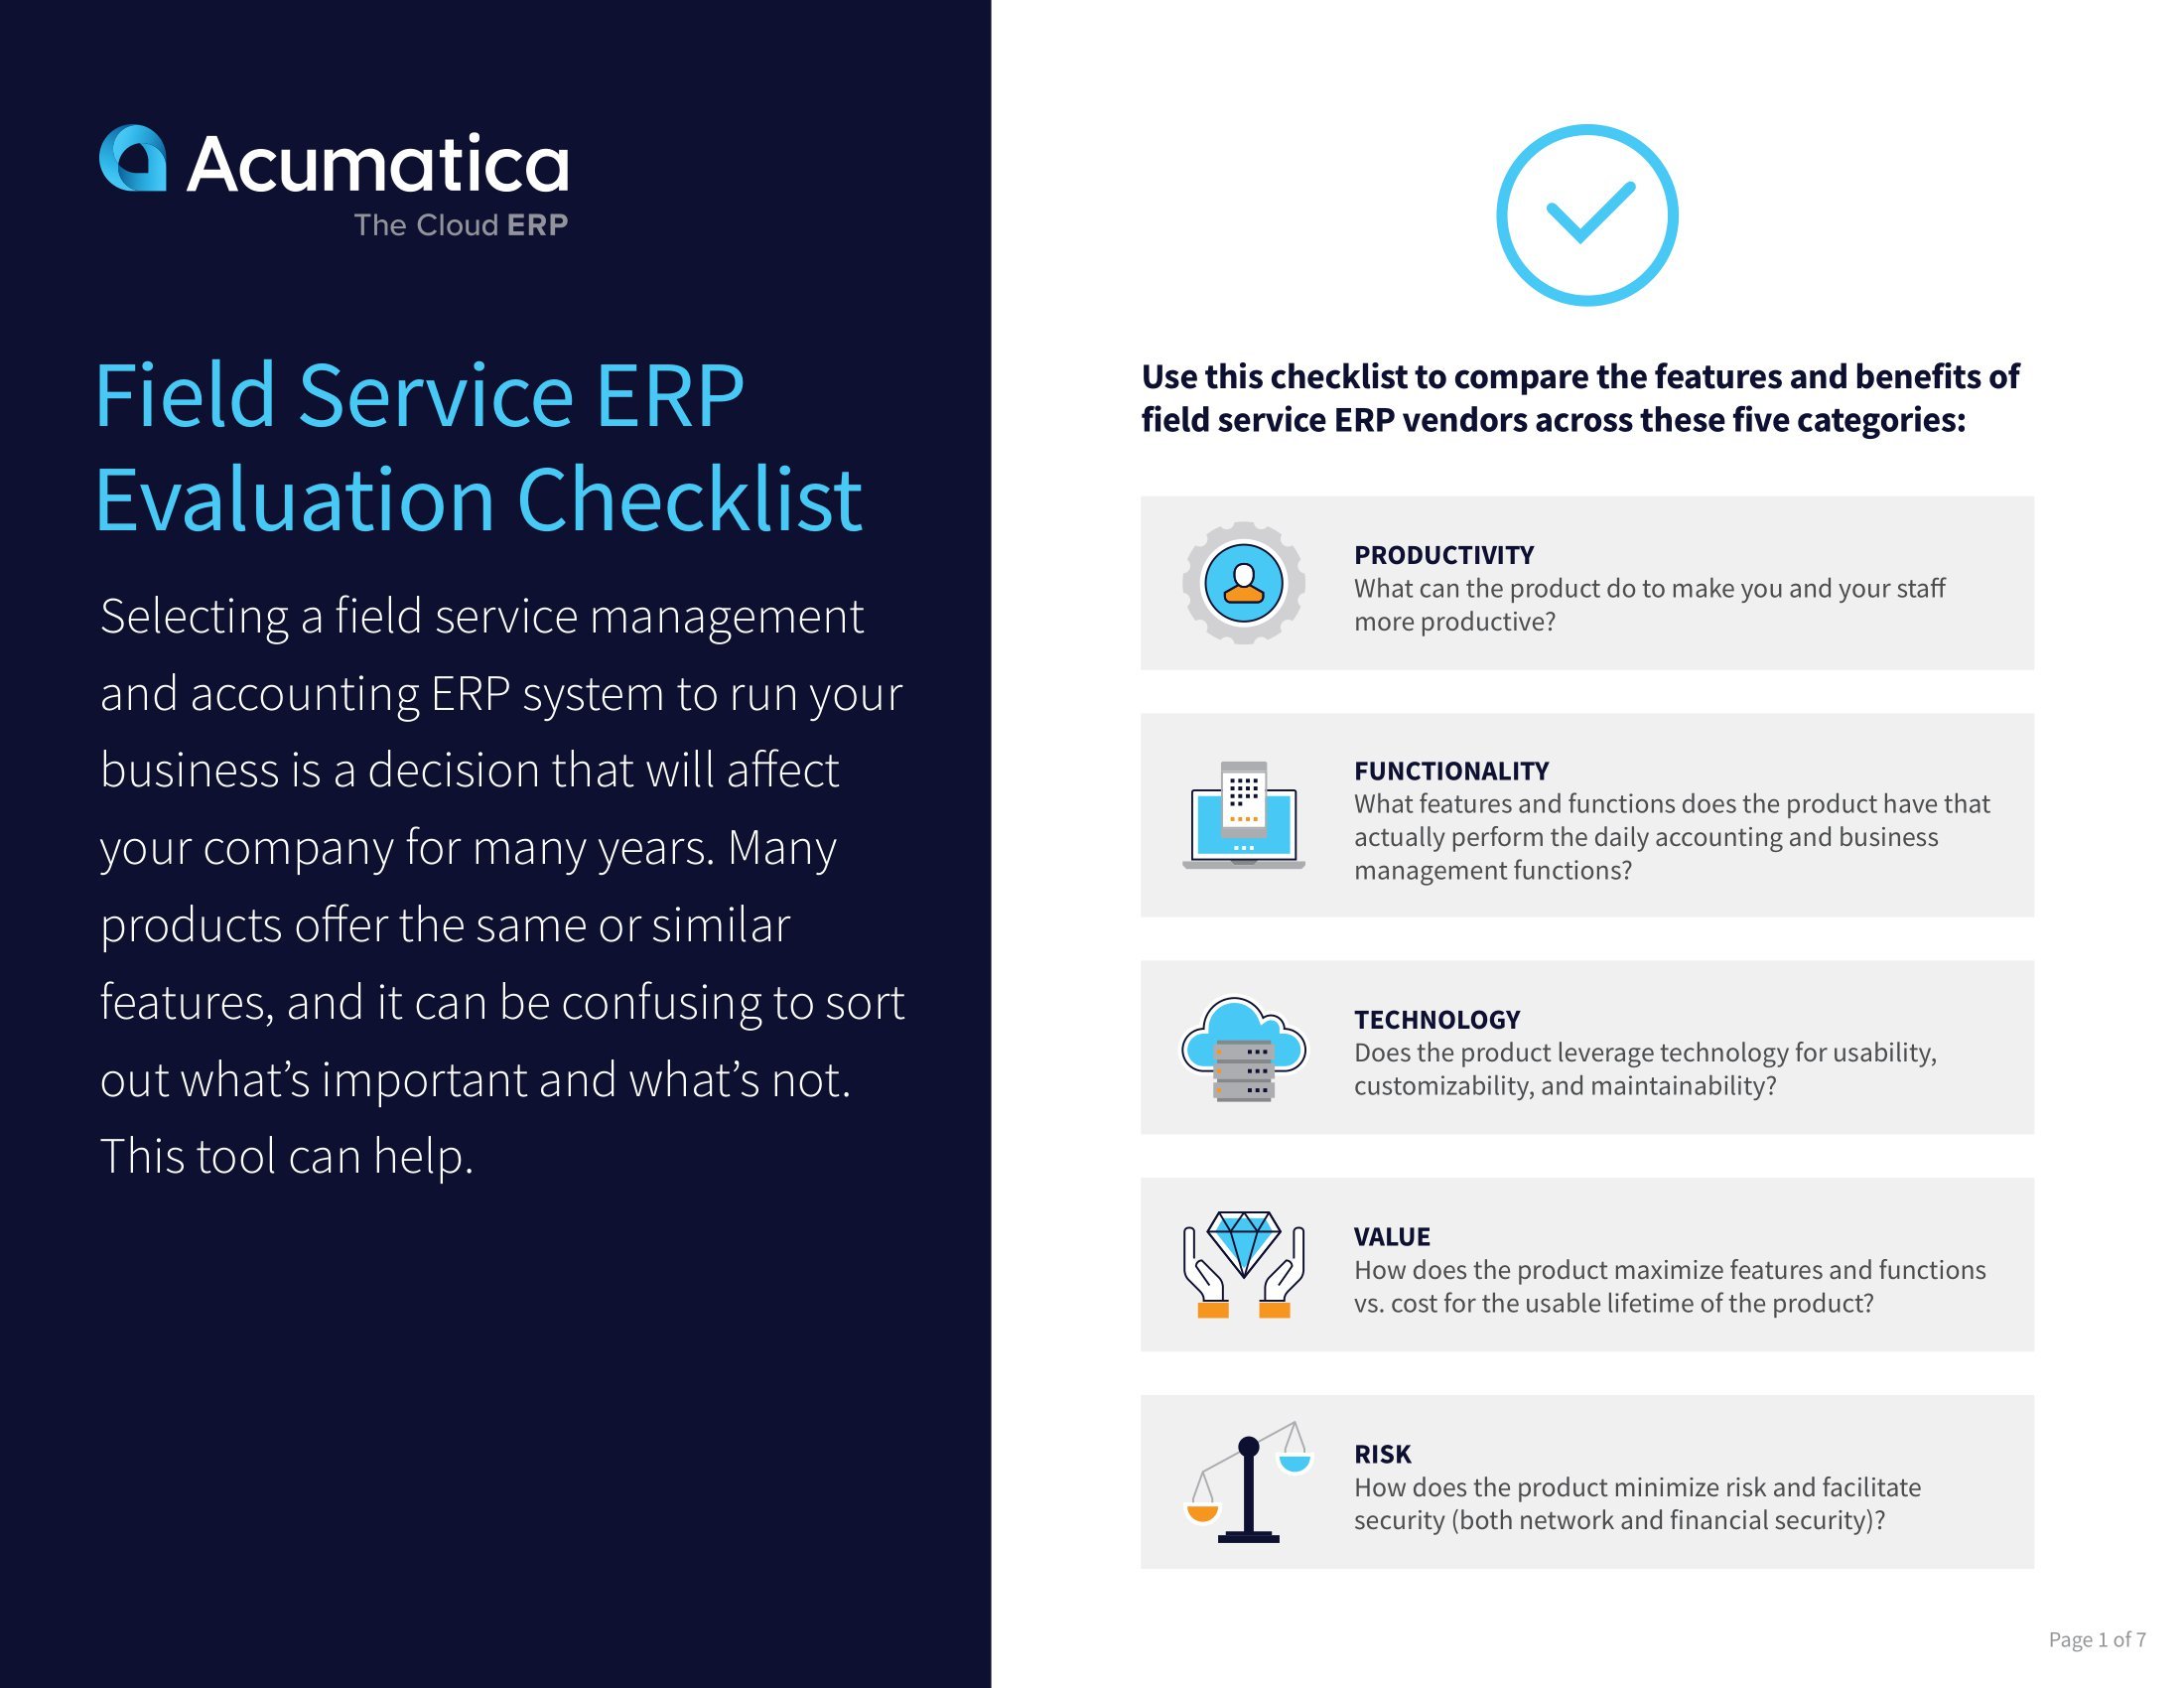 Field Service ERP: How Does Your Solution Stack Up?